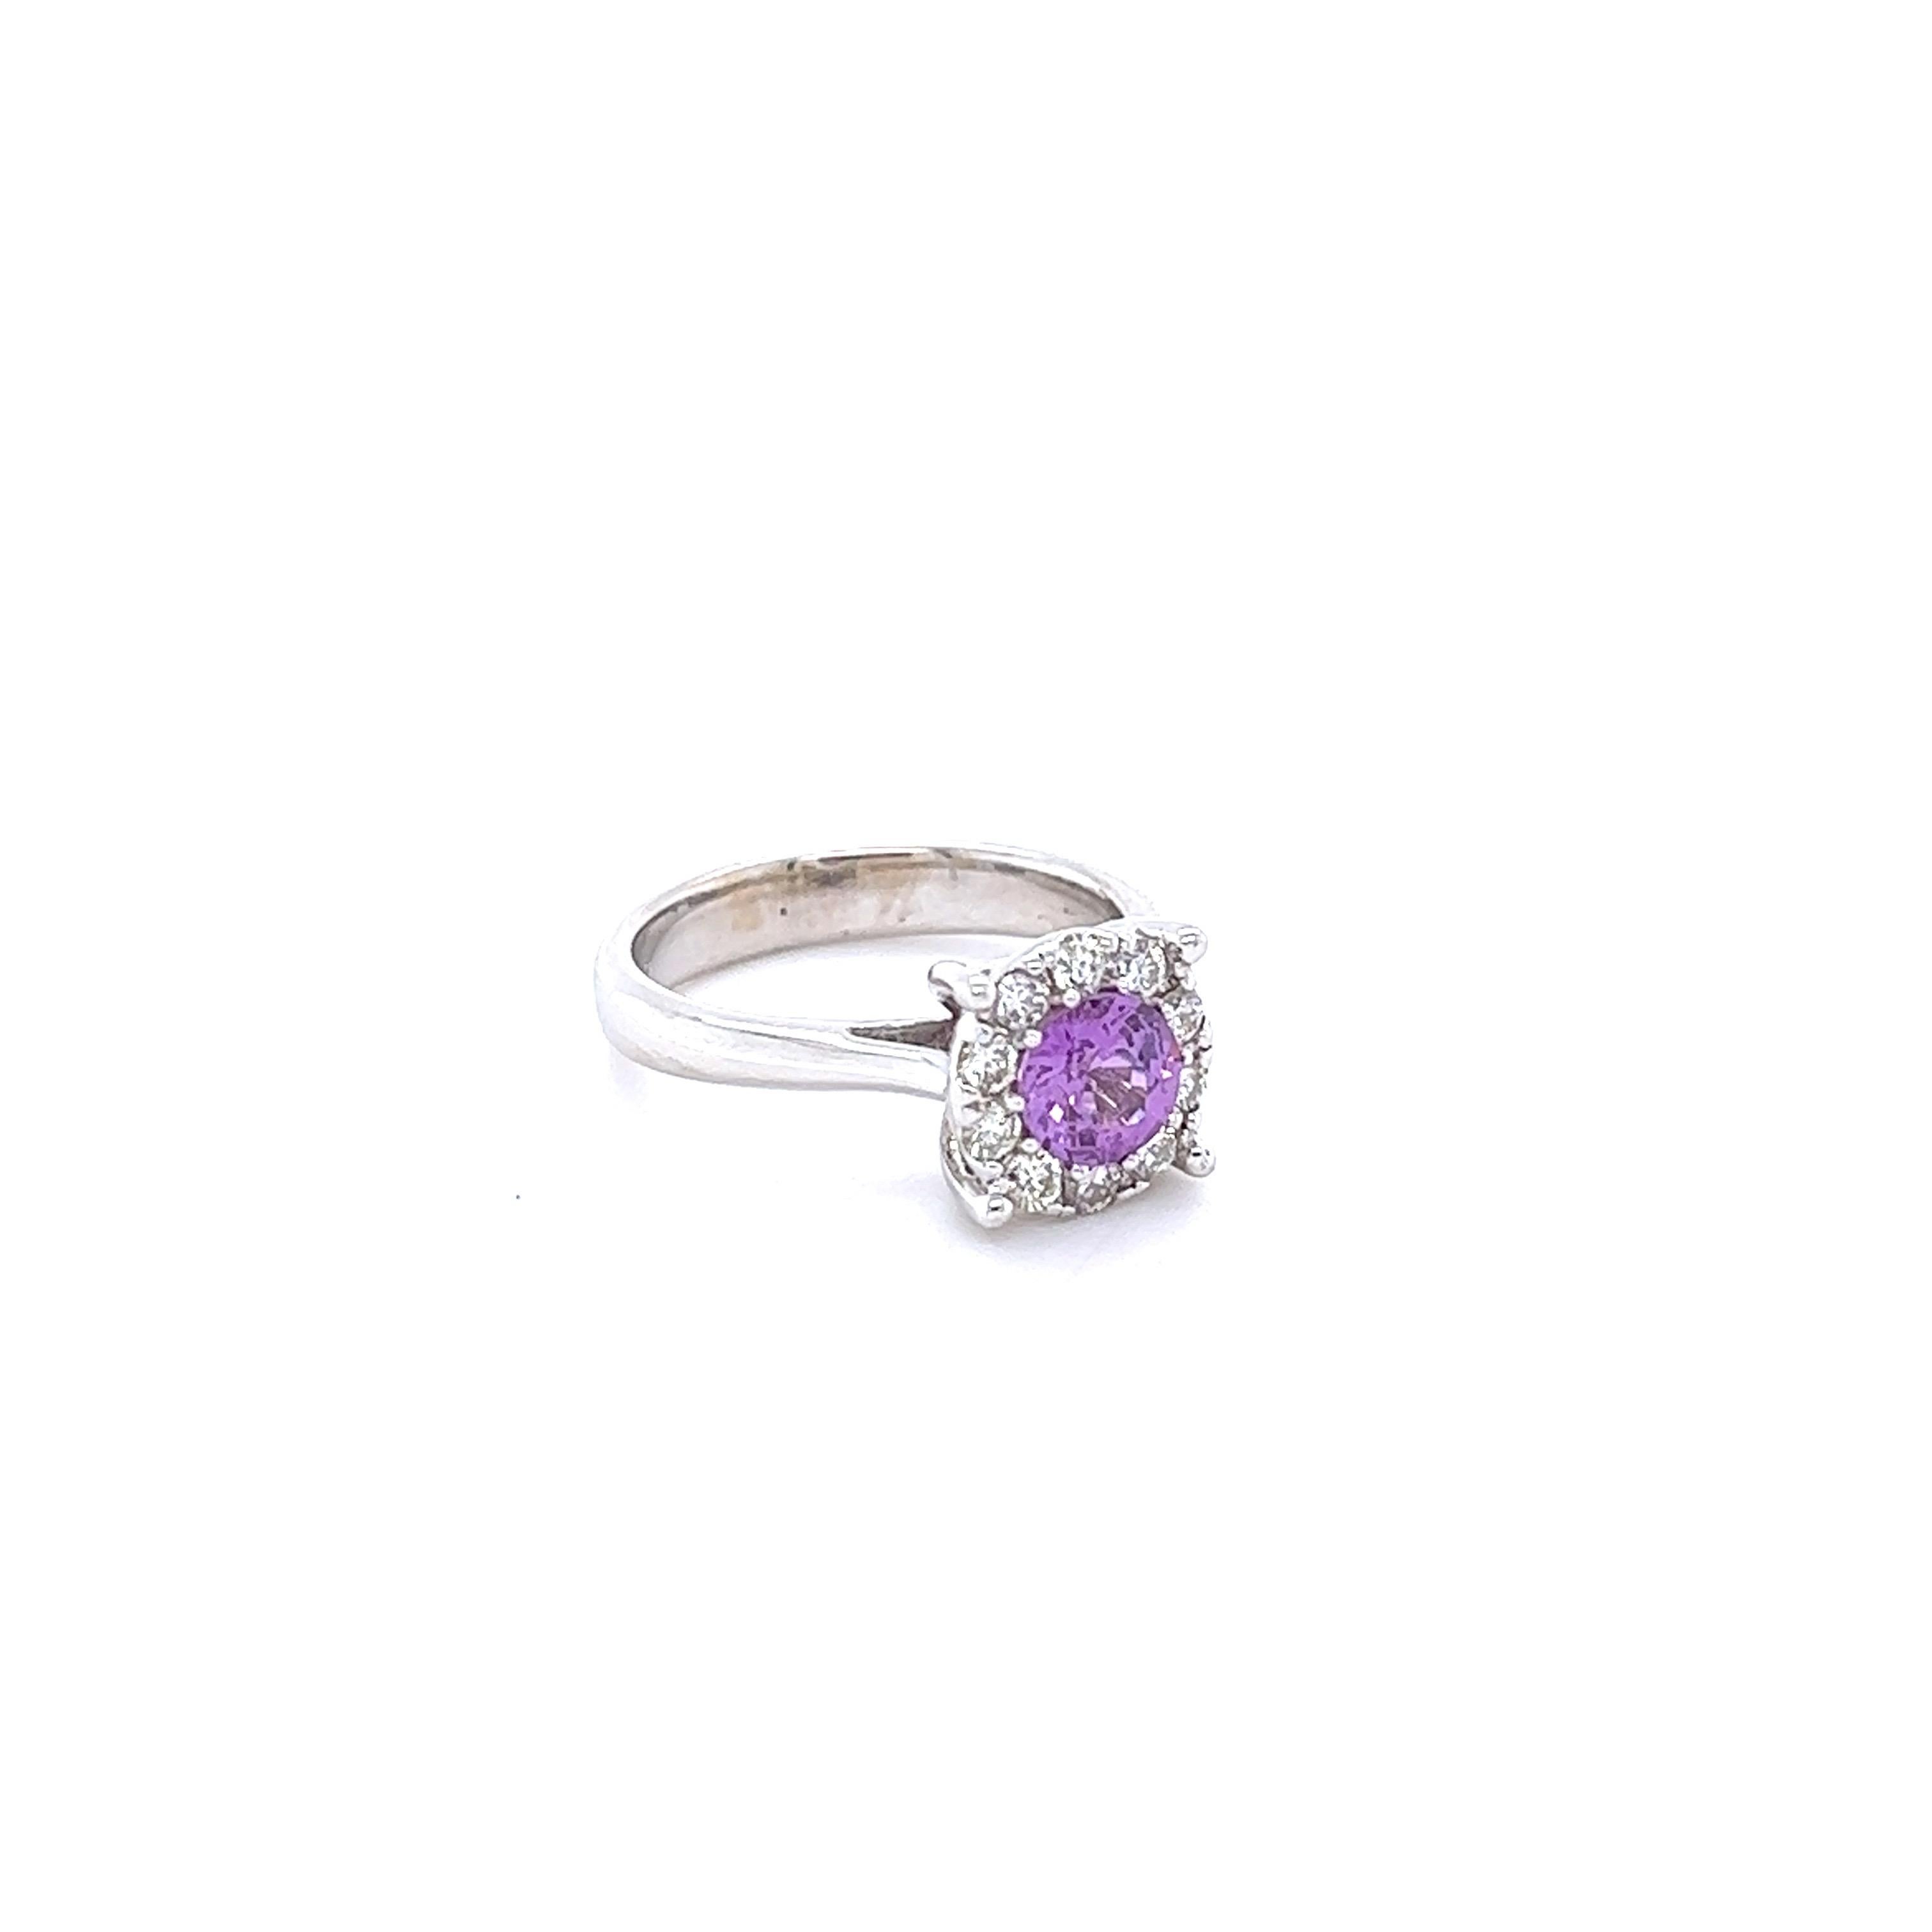 This beautiful ring has a Natural Round Cut Pink Sapphire that weighs 0.98 Carats and measures at approximately 6 mm. 

The ring is embellished with 10 Round Cut Diamonds that weigh 0.54 Carats with a clarity and color of VS2/H.
The total carat